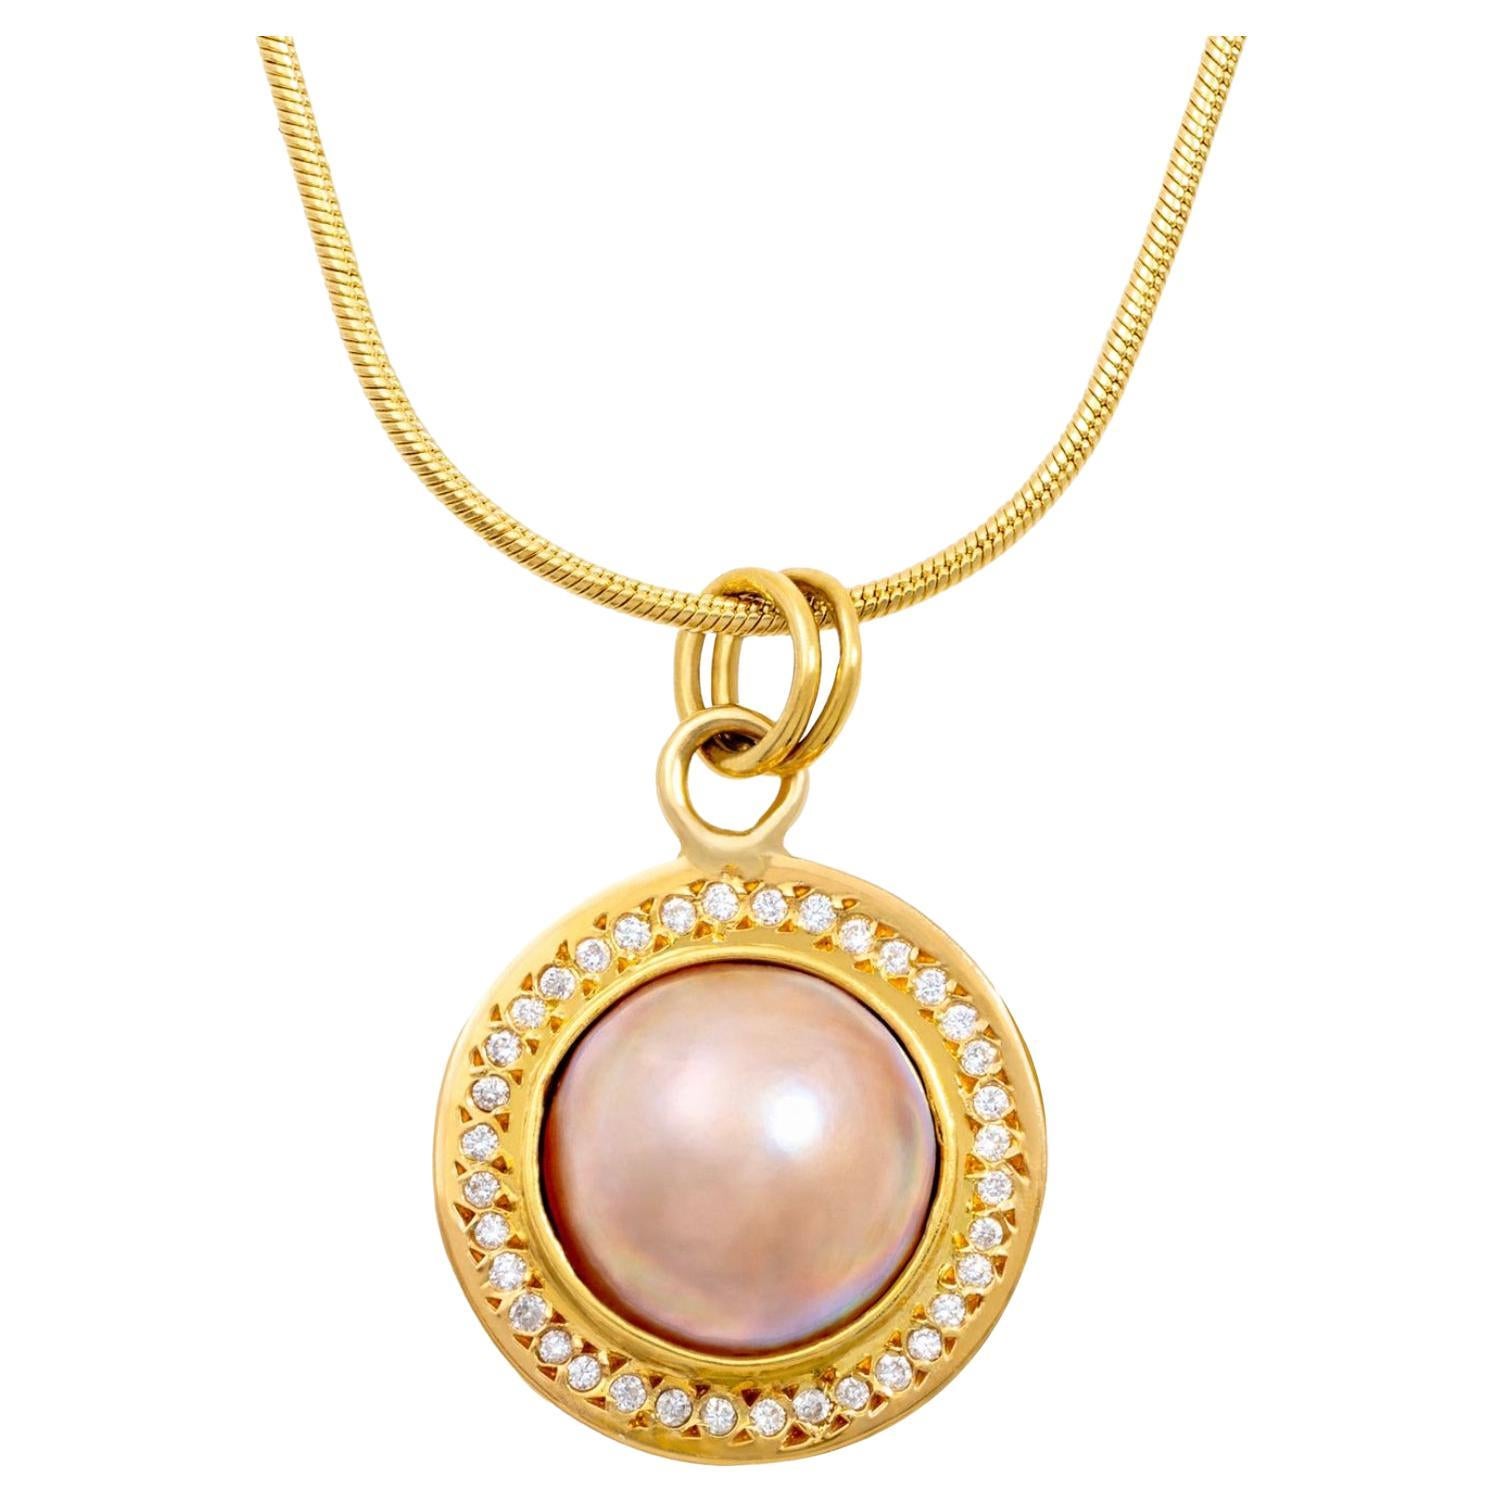 Paris & Lily, Handmade, 22k Gold, Pink Mabe Pearl Pendant with Diamonds For Sale